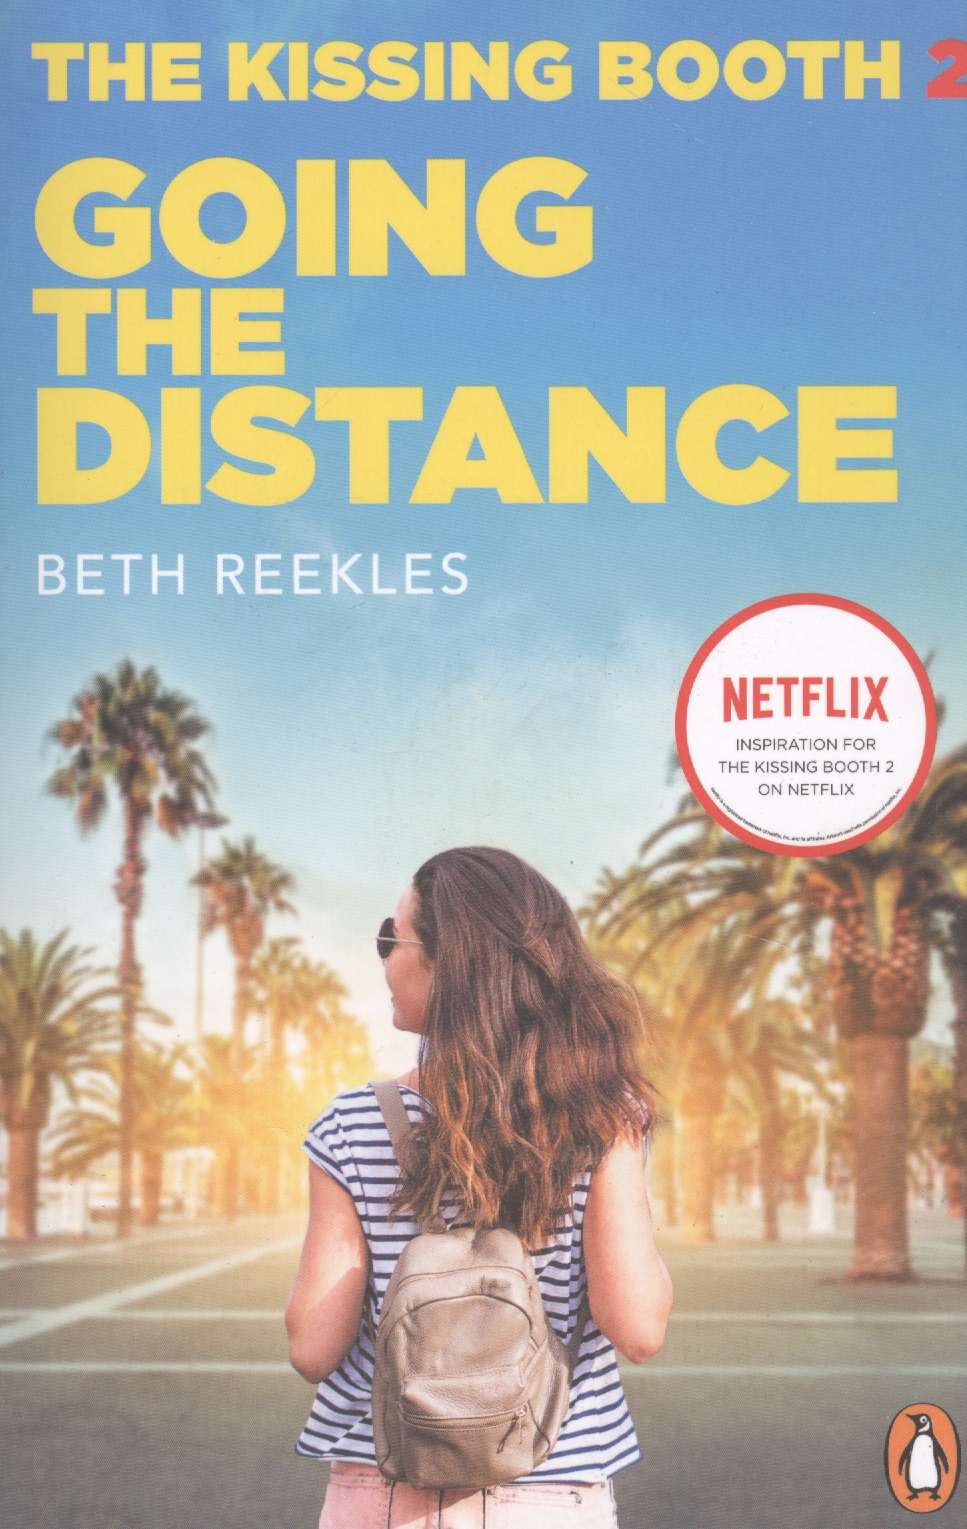 Reekles Beth The Kissing Booth 2: Going the Distance reekles beth the kissing booth